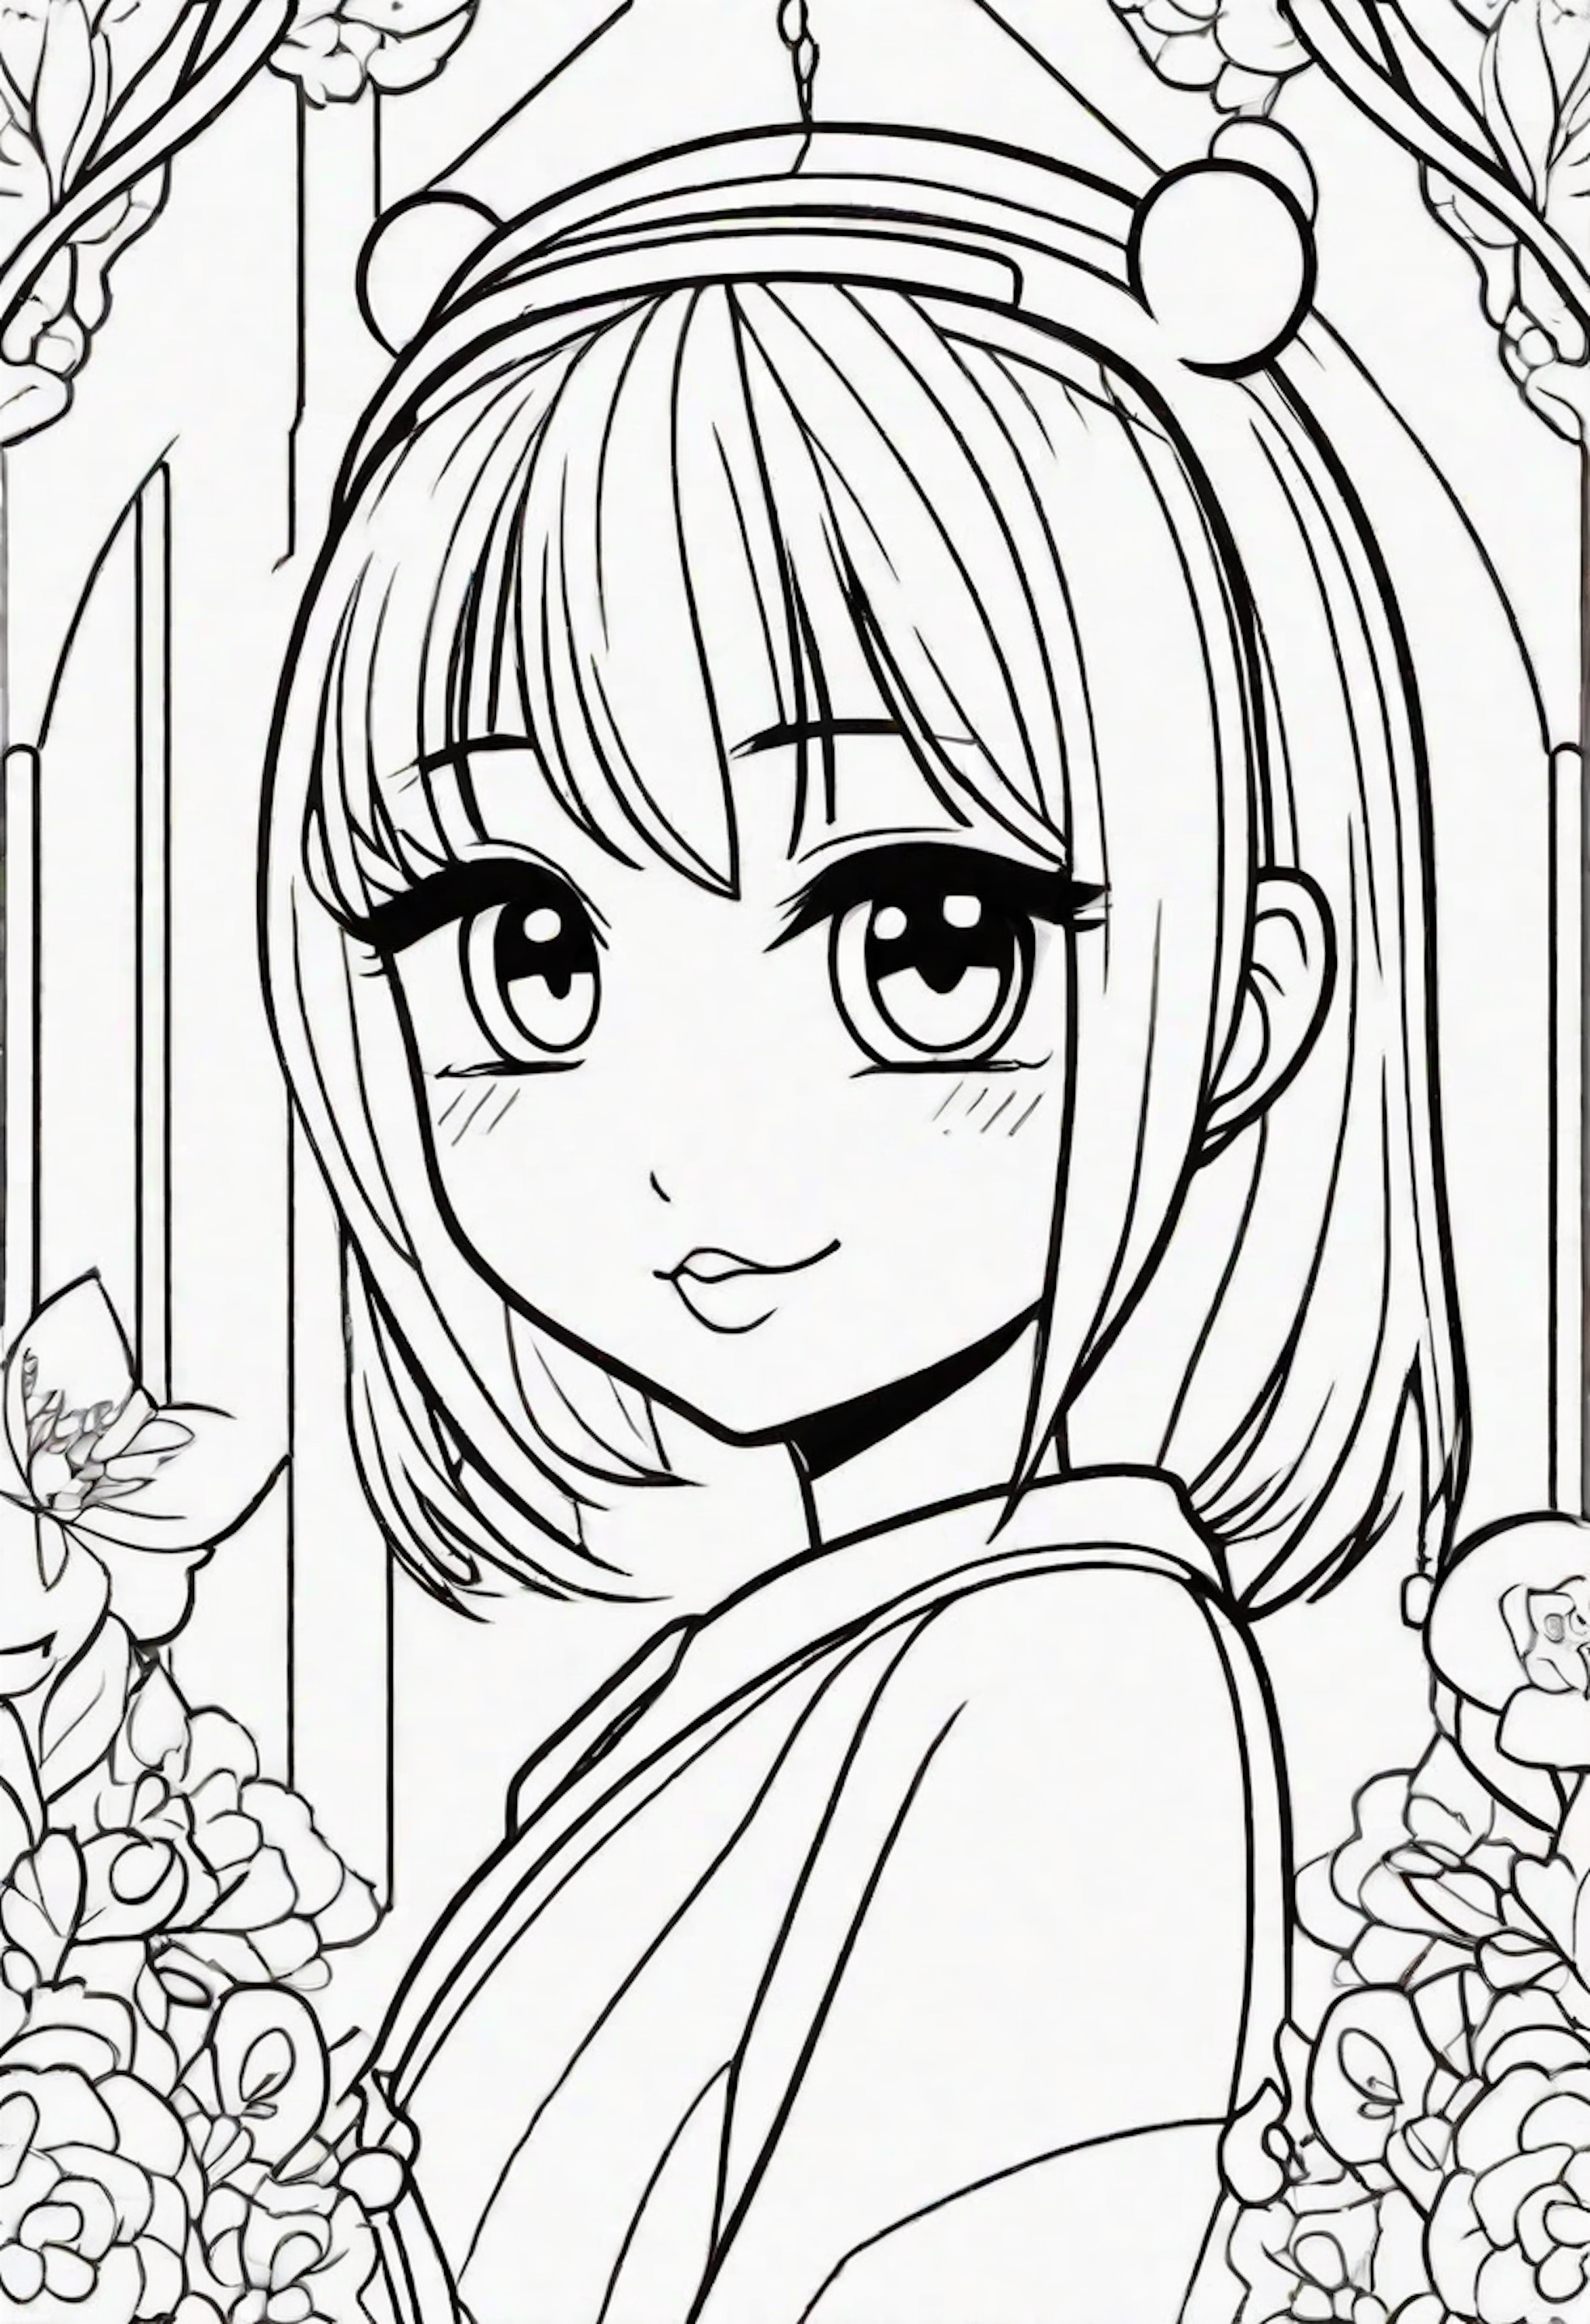 A coloring page for 2 Anime coloring pages